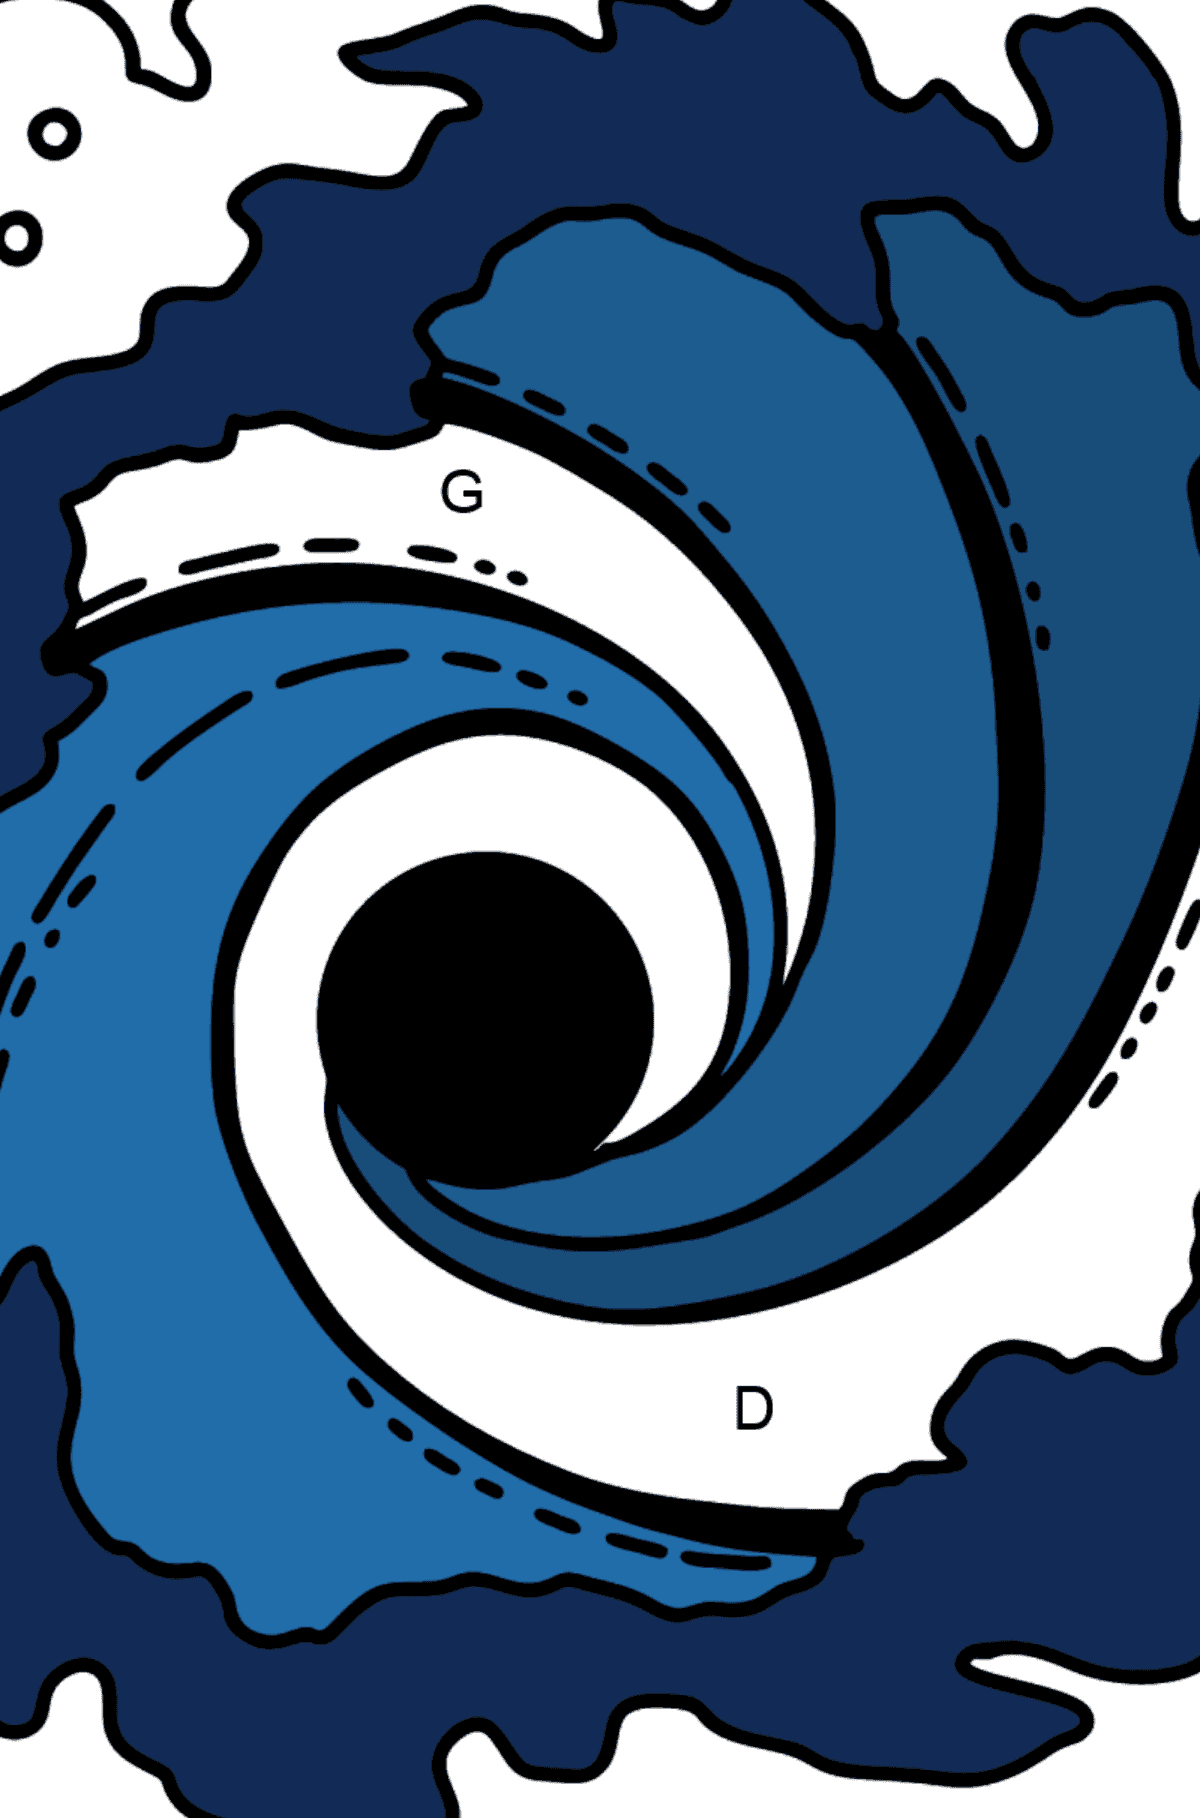 Black Hole coloring page - Coloring by Letters for Kids